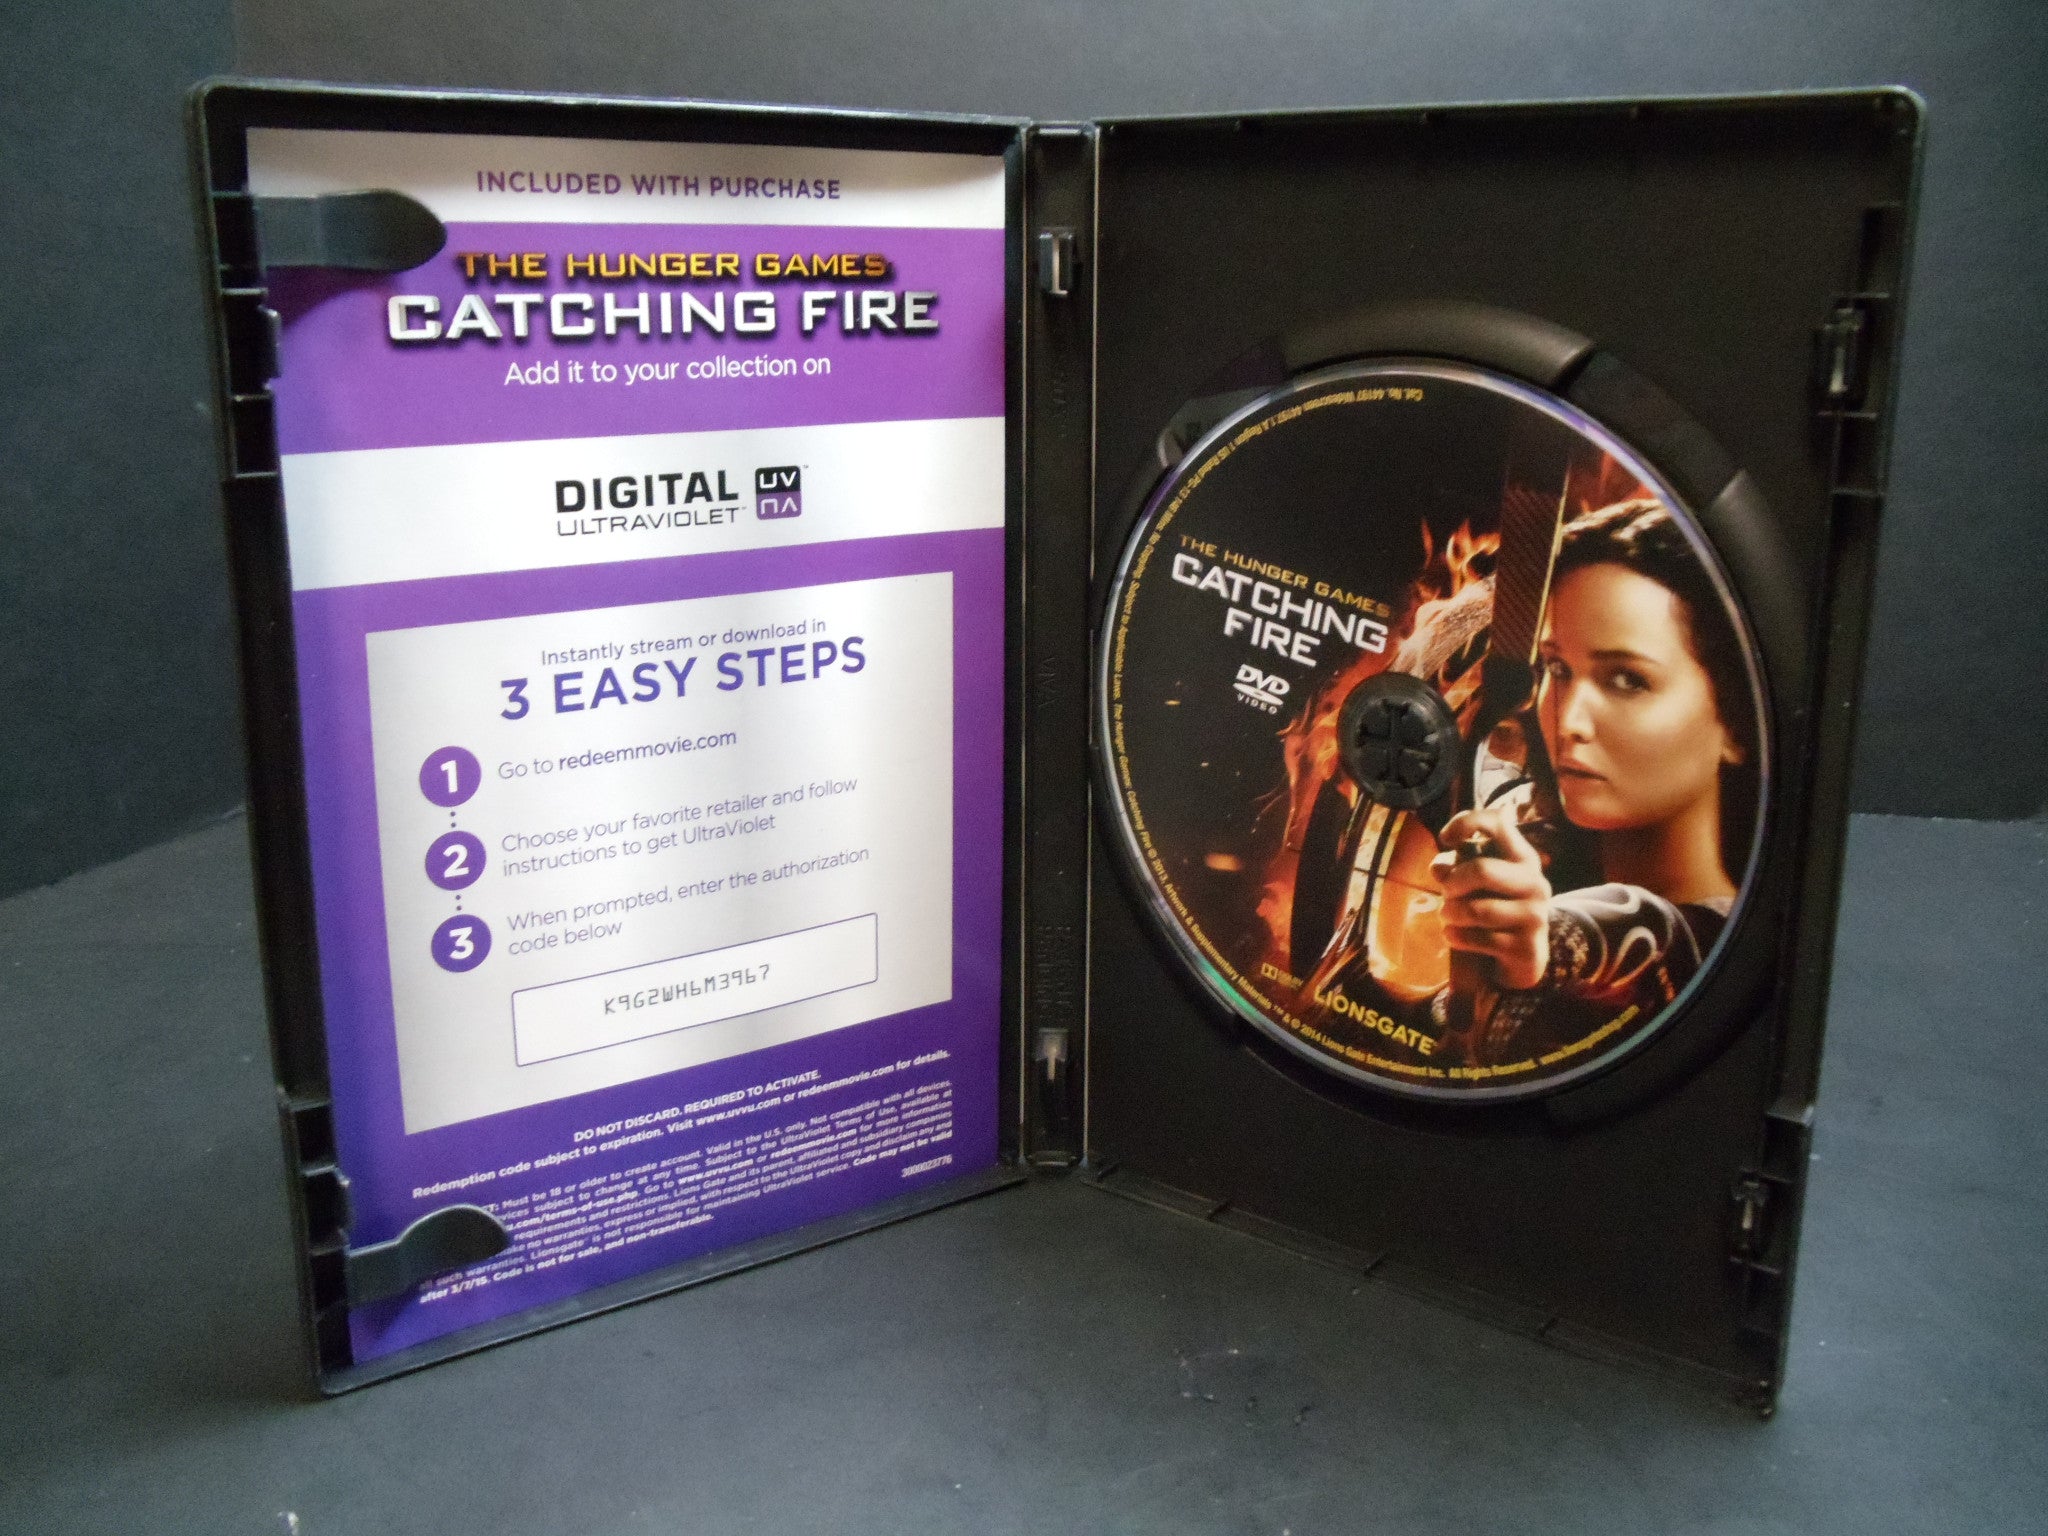 The Hunger Games: Catching Fire (DVD + Digital)